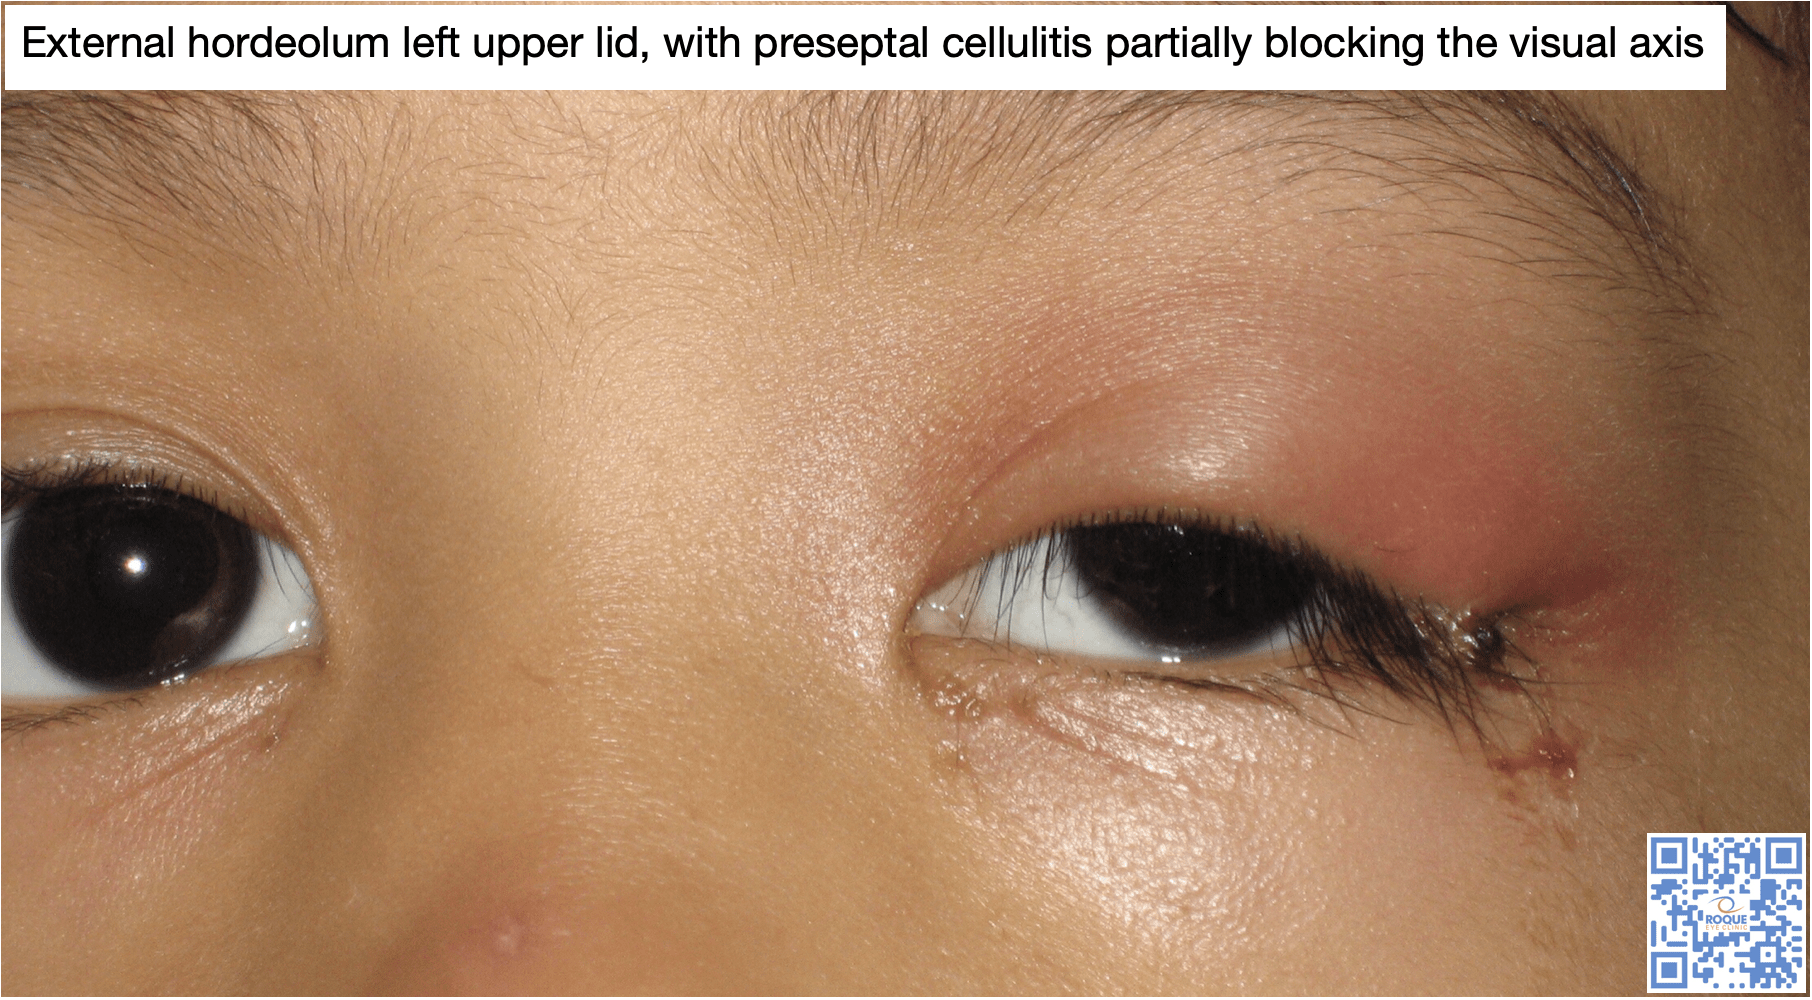 External hordeolum left upper lid, with preseptal cellulitis partially blocking the visual axis